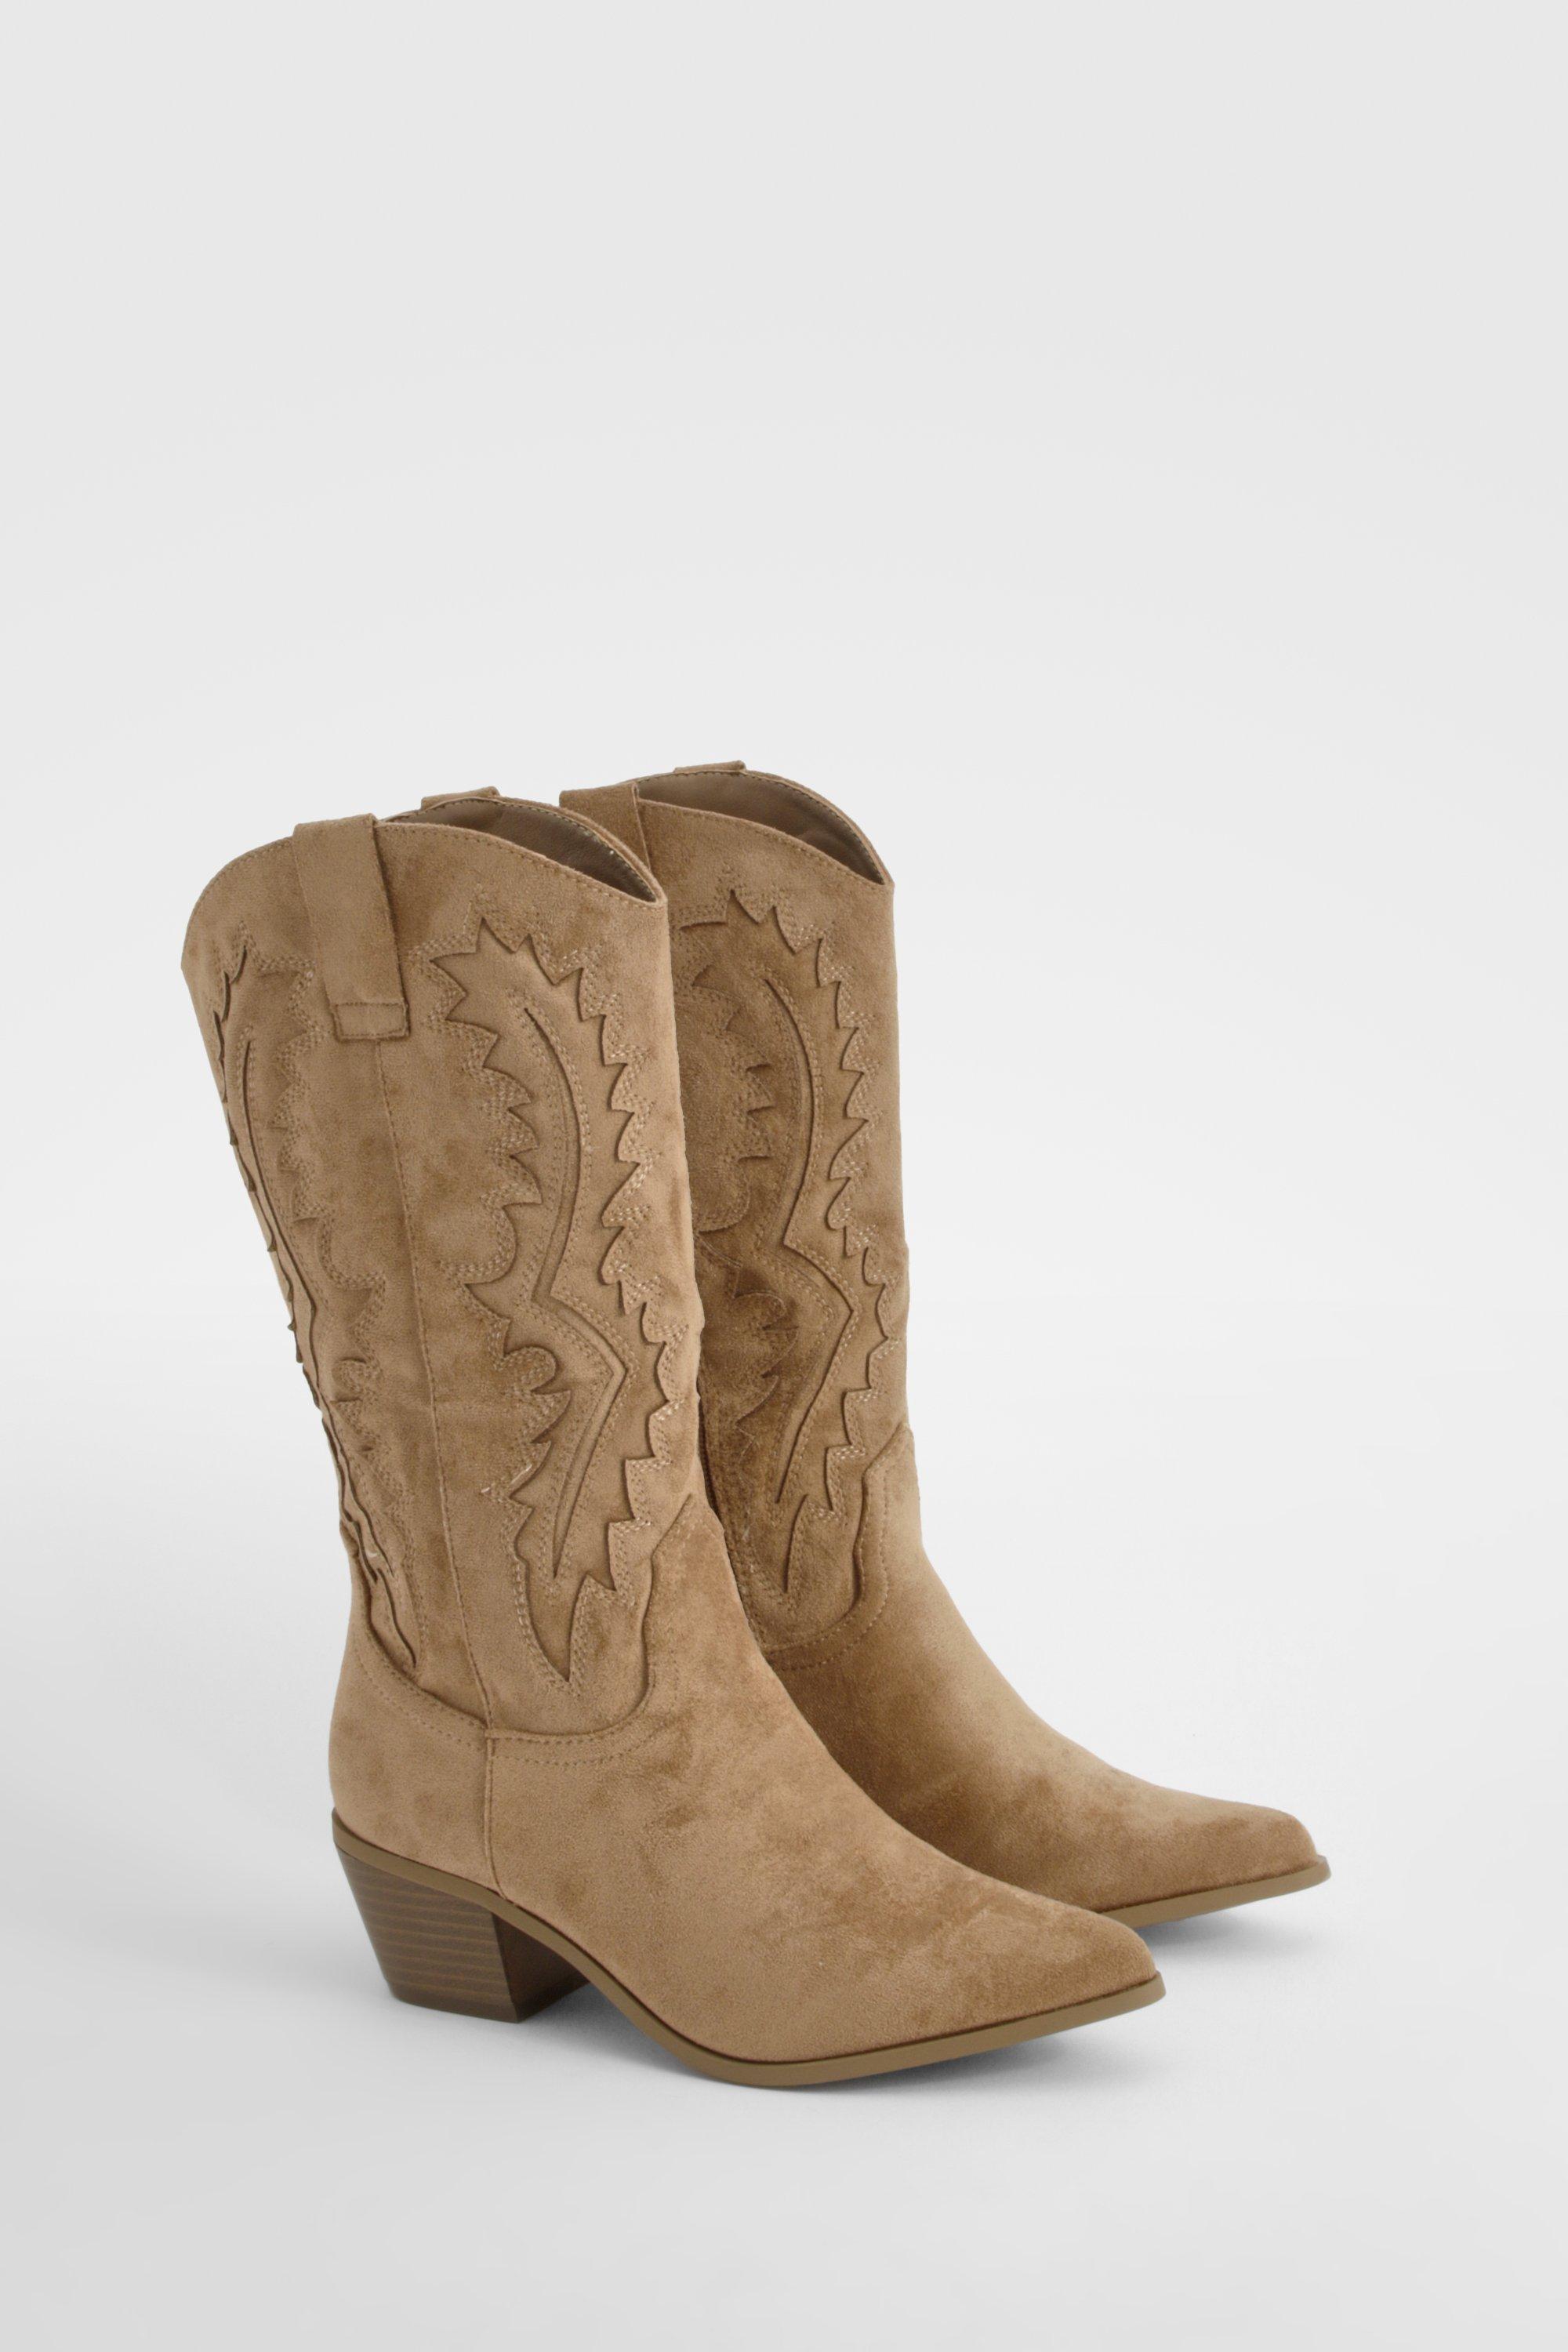 Boohoo Embroidered Western Cowboy Boots, Camel